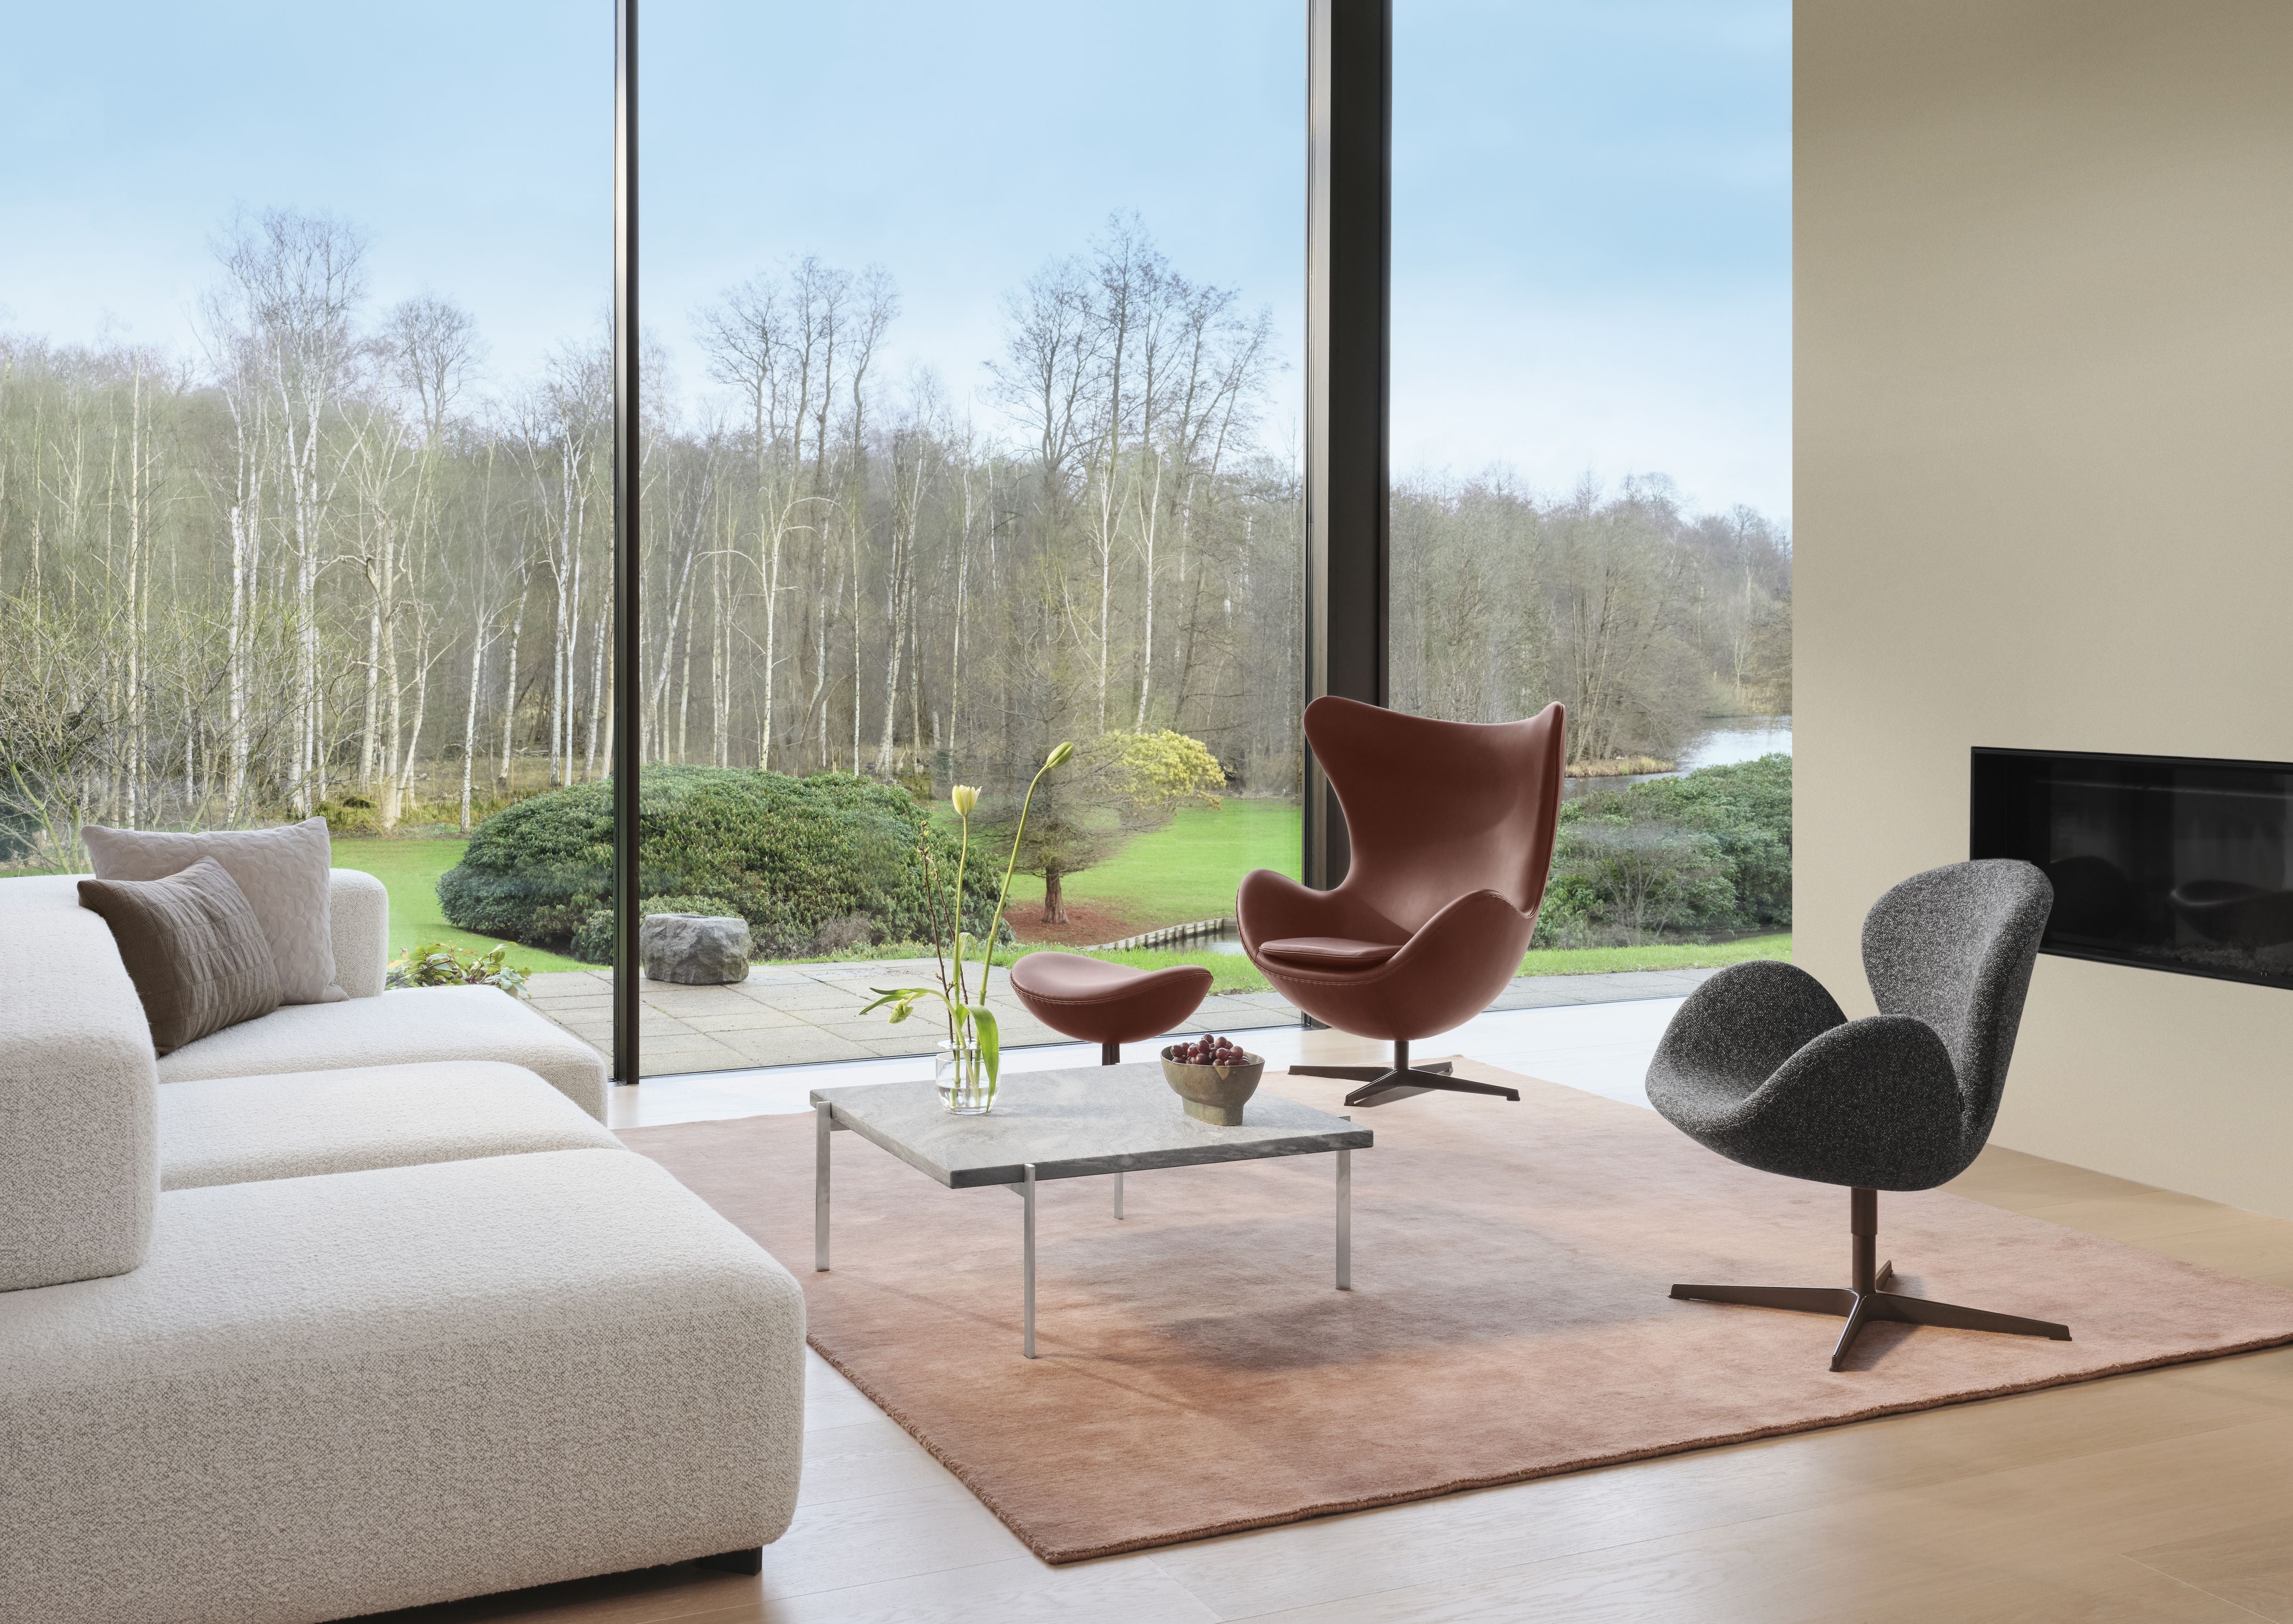 Fritz Hansen The Egg Lounge Chair, Grace Chestnut Leather Anniversary Collection